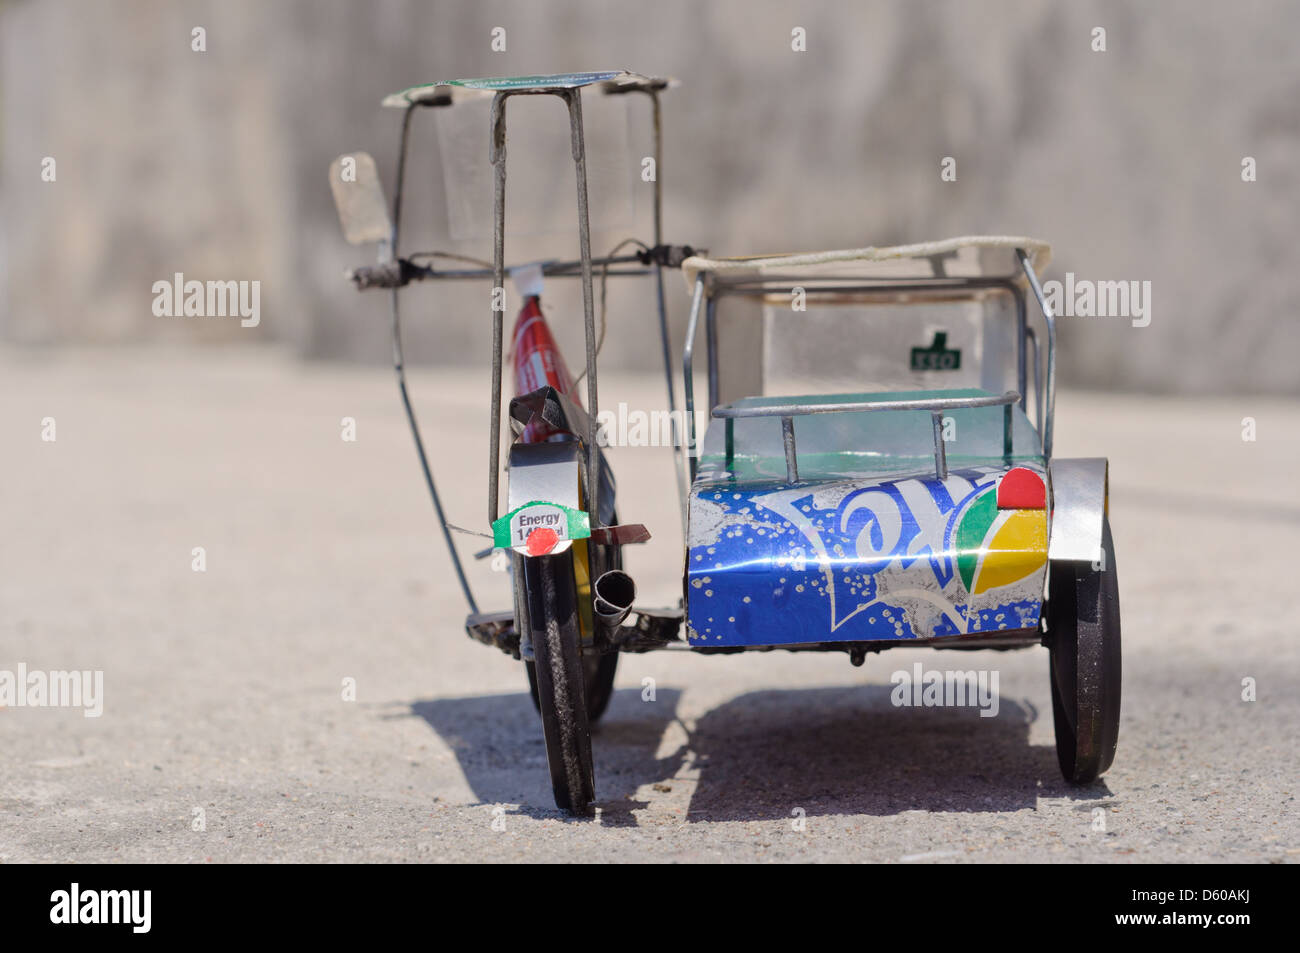 Toy model of a Philippine tricycle, motorcycle with sidecar, made of used Coke, Sprite, Schweppes beverage cans Stock Photo